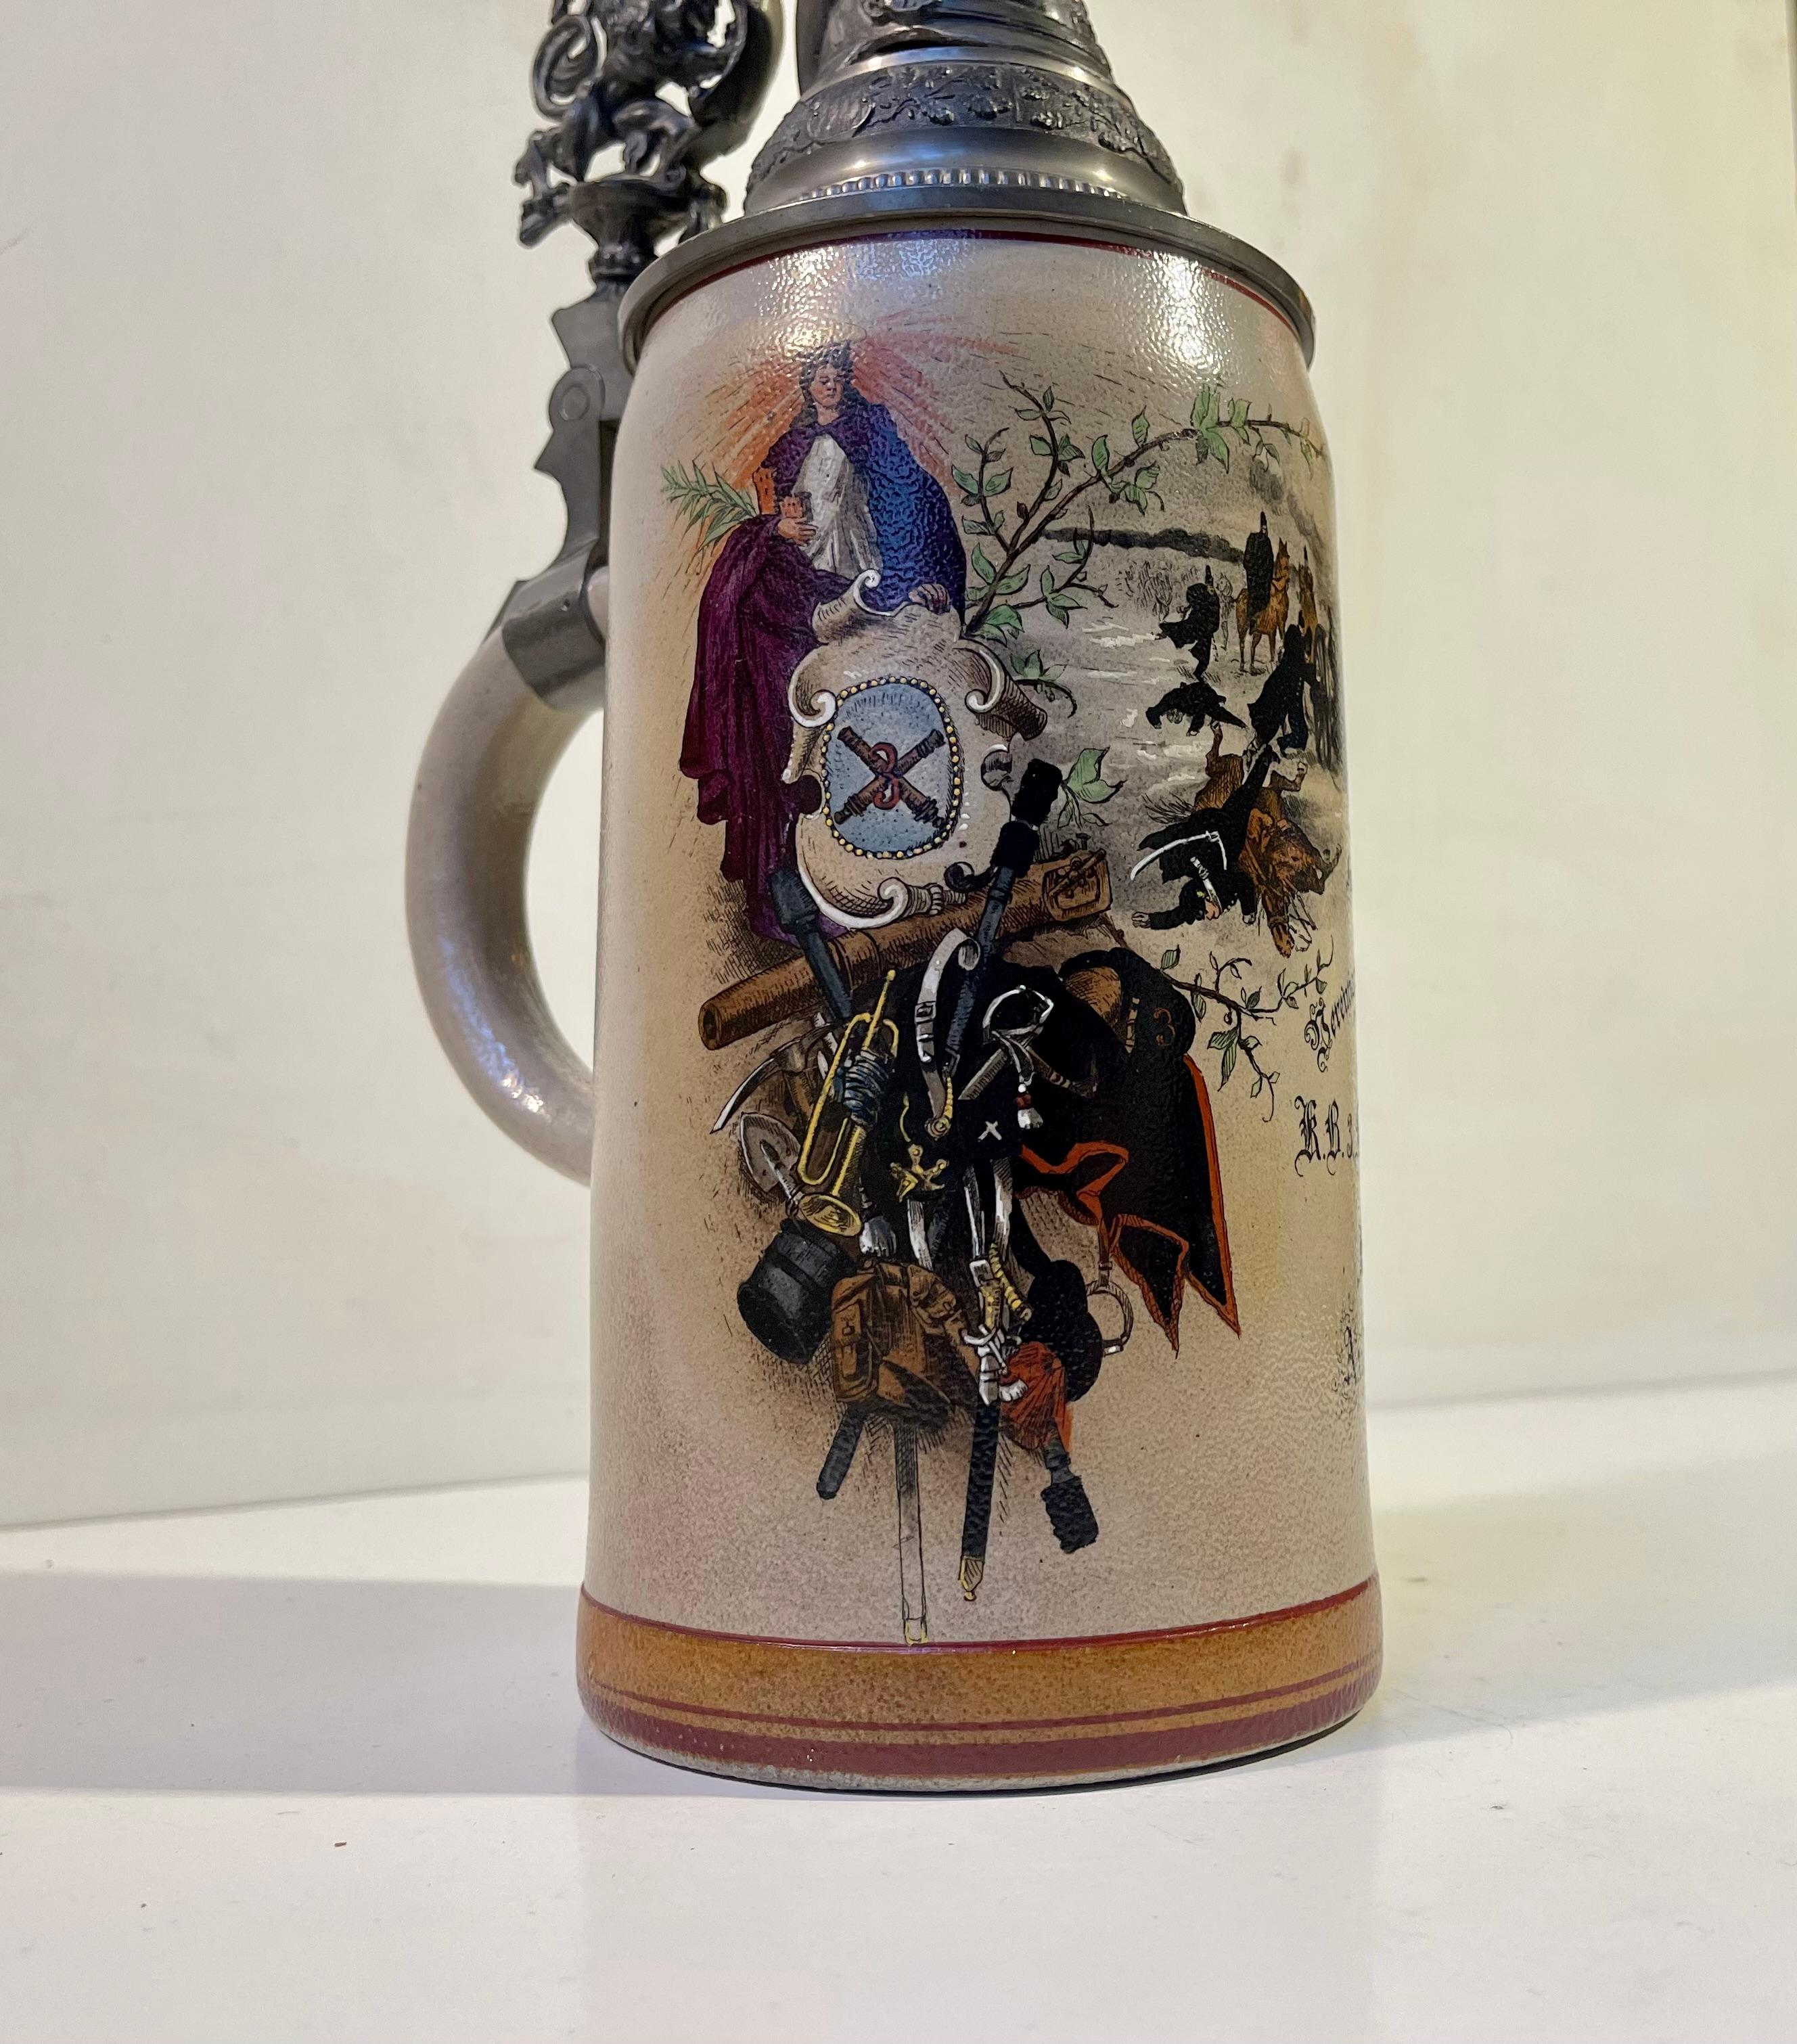 Late Victorian Antique Ornamental Münich Bier Stein with Hand-painted WWI Artilleri Scene For Sale